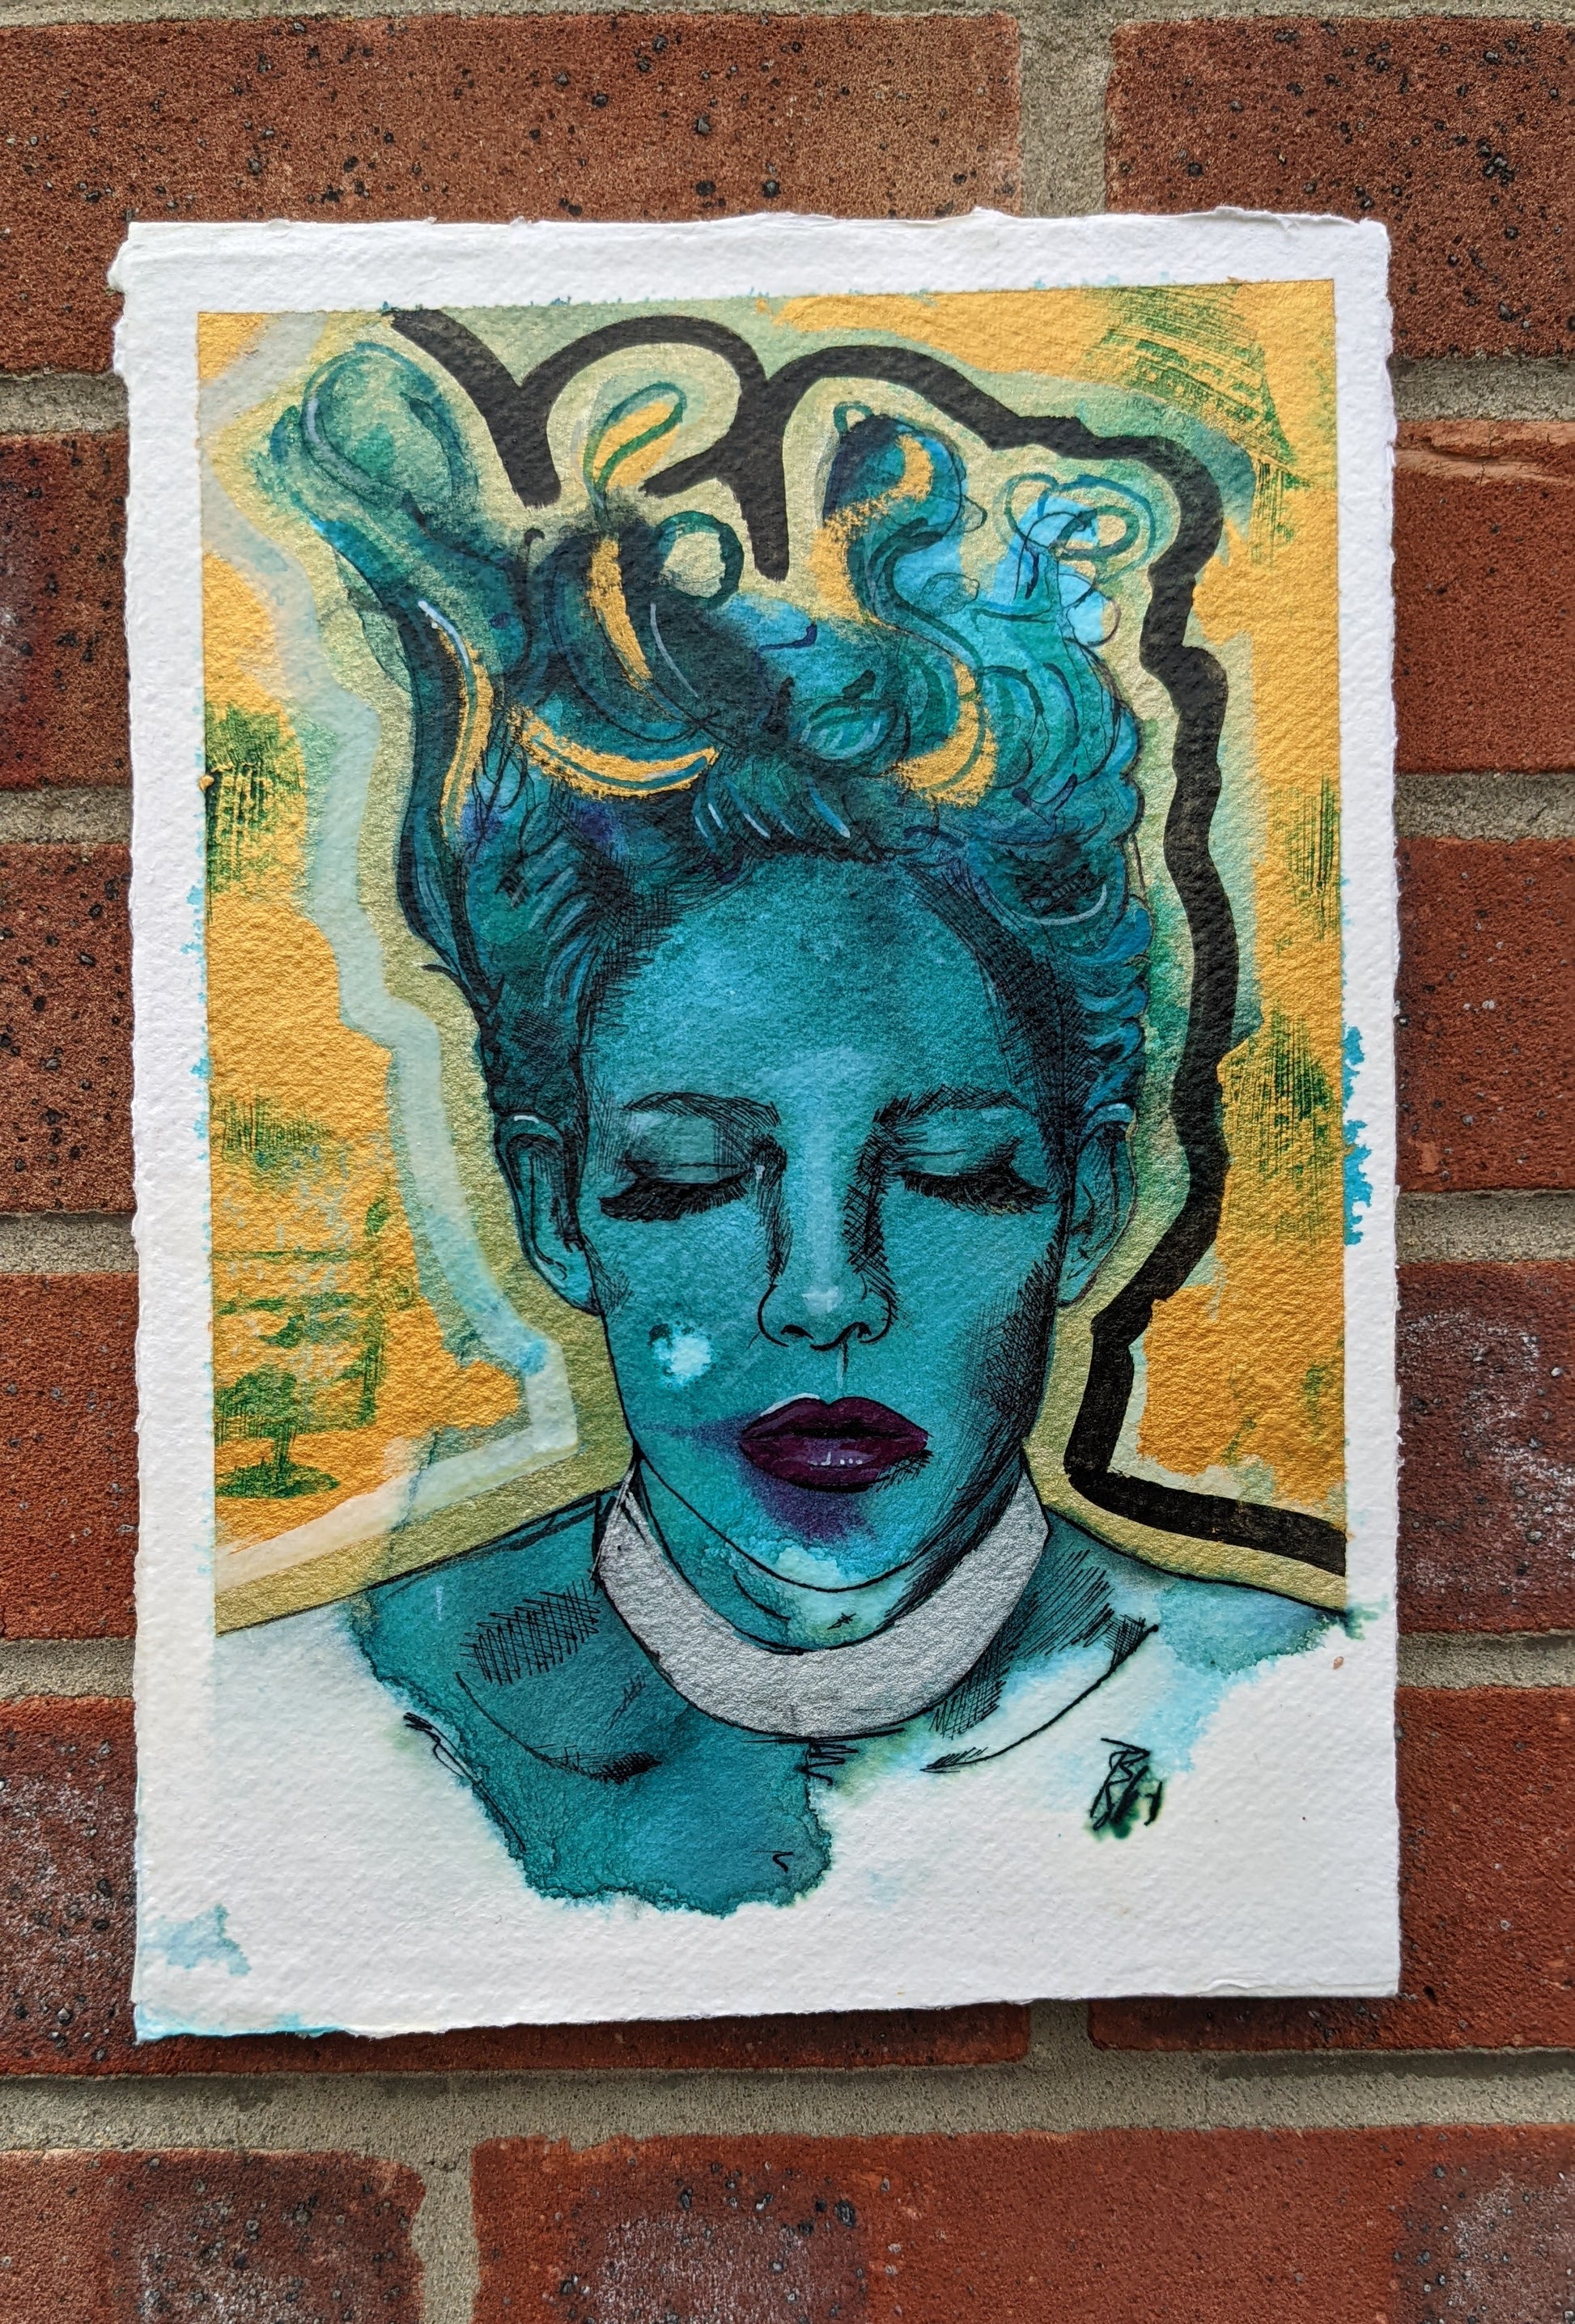 A beautiful original painting in gold and teal, painted with inks and acrylic paint, on handmade Khadi paper, by Dianne Bowell, middlesbrough artist